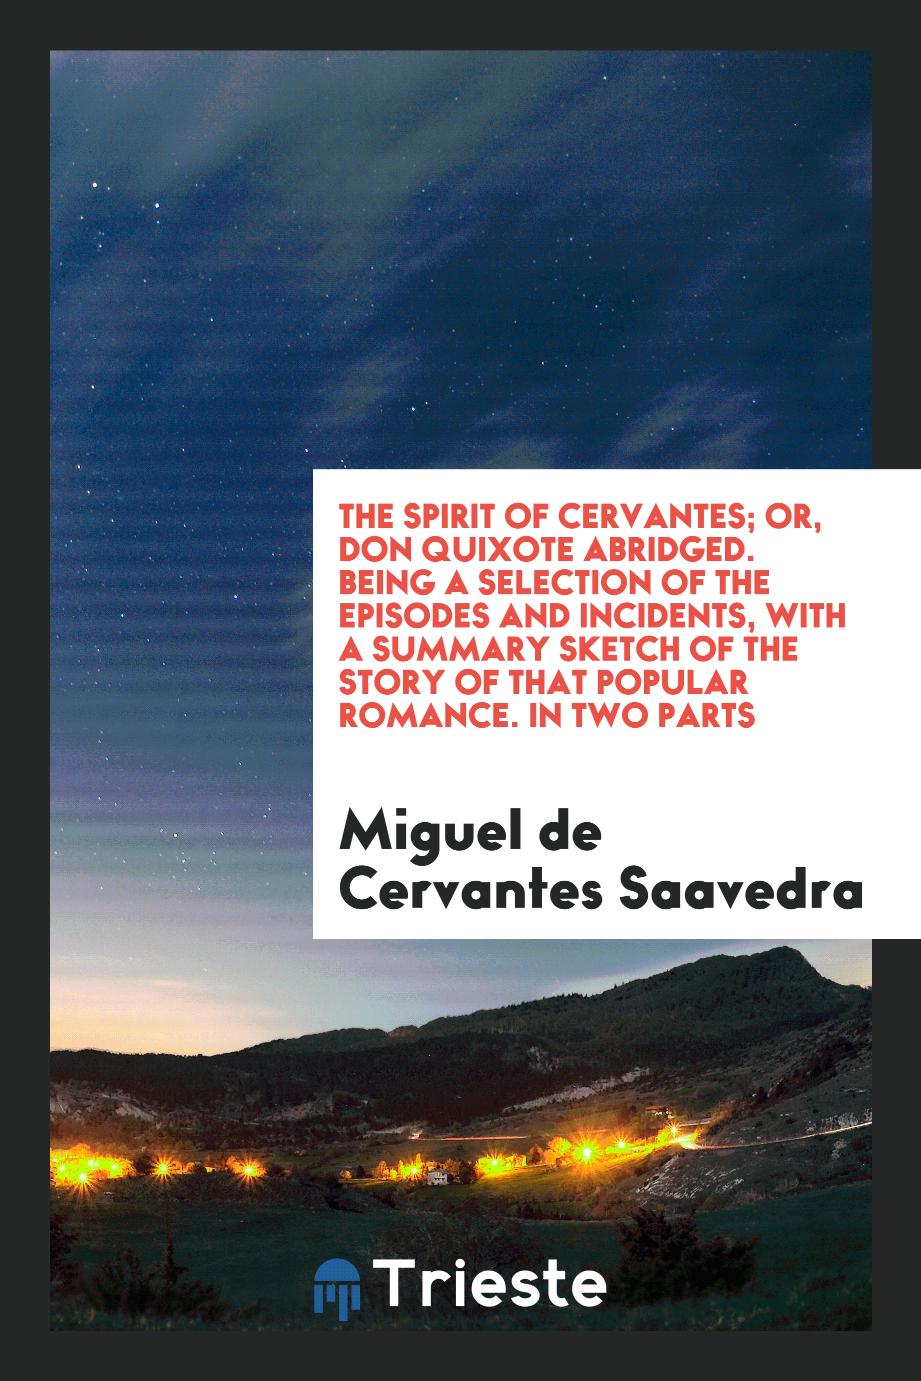 The Spirit of Cervantes; Or, Don Quixote Abridged. Being a Selection of the Episodes and Incidents, with a Summary Sketch of the Story of That Popular Romance. In Two Parts